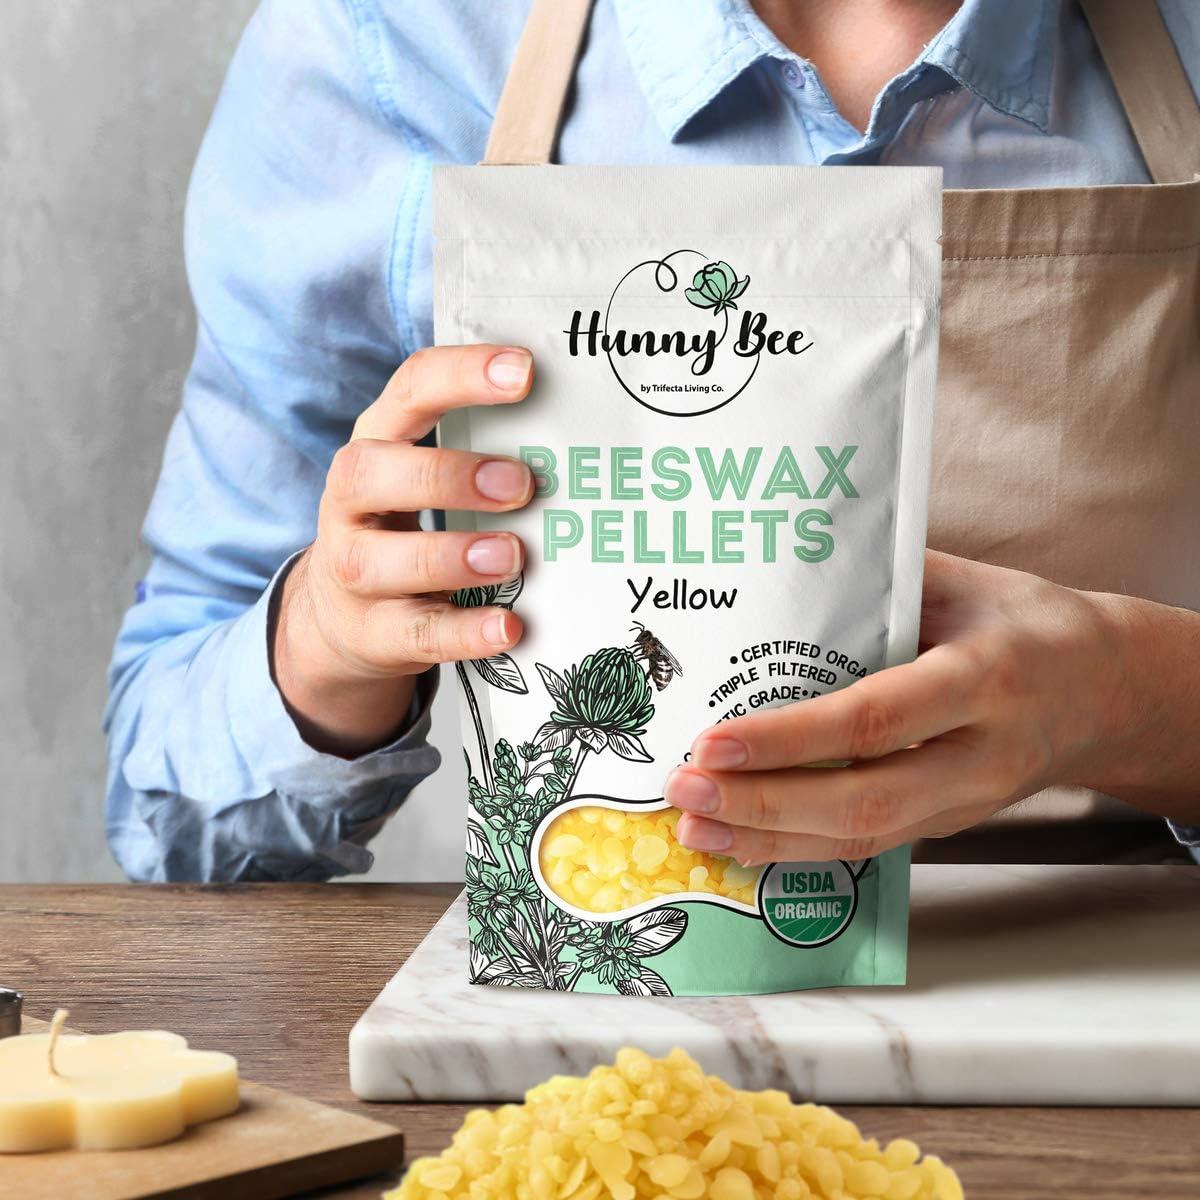 Organic Yellow Beeswax Pellets 5 lb, Pure, Natural, Cosmetic Grade Bees  wax, Triple Filtered, Great For Diy Lip Balm, Lotions and More! - White